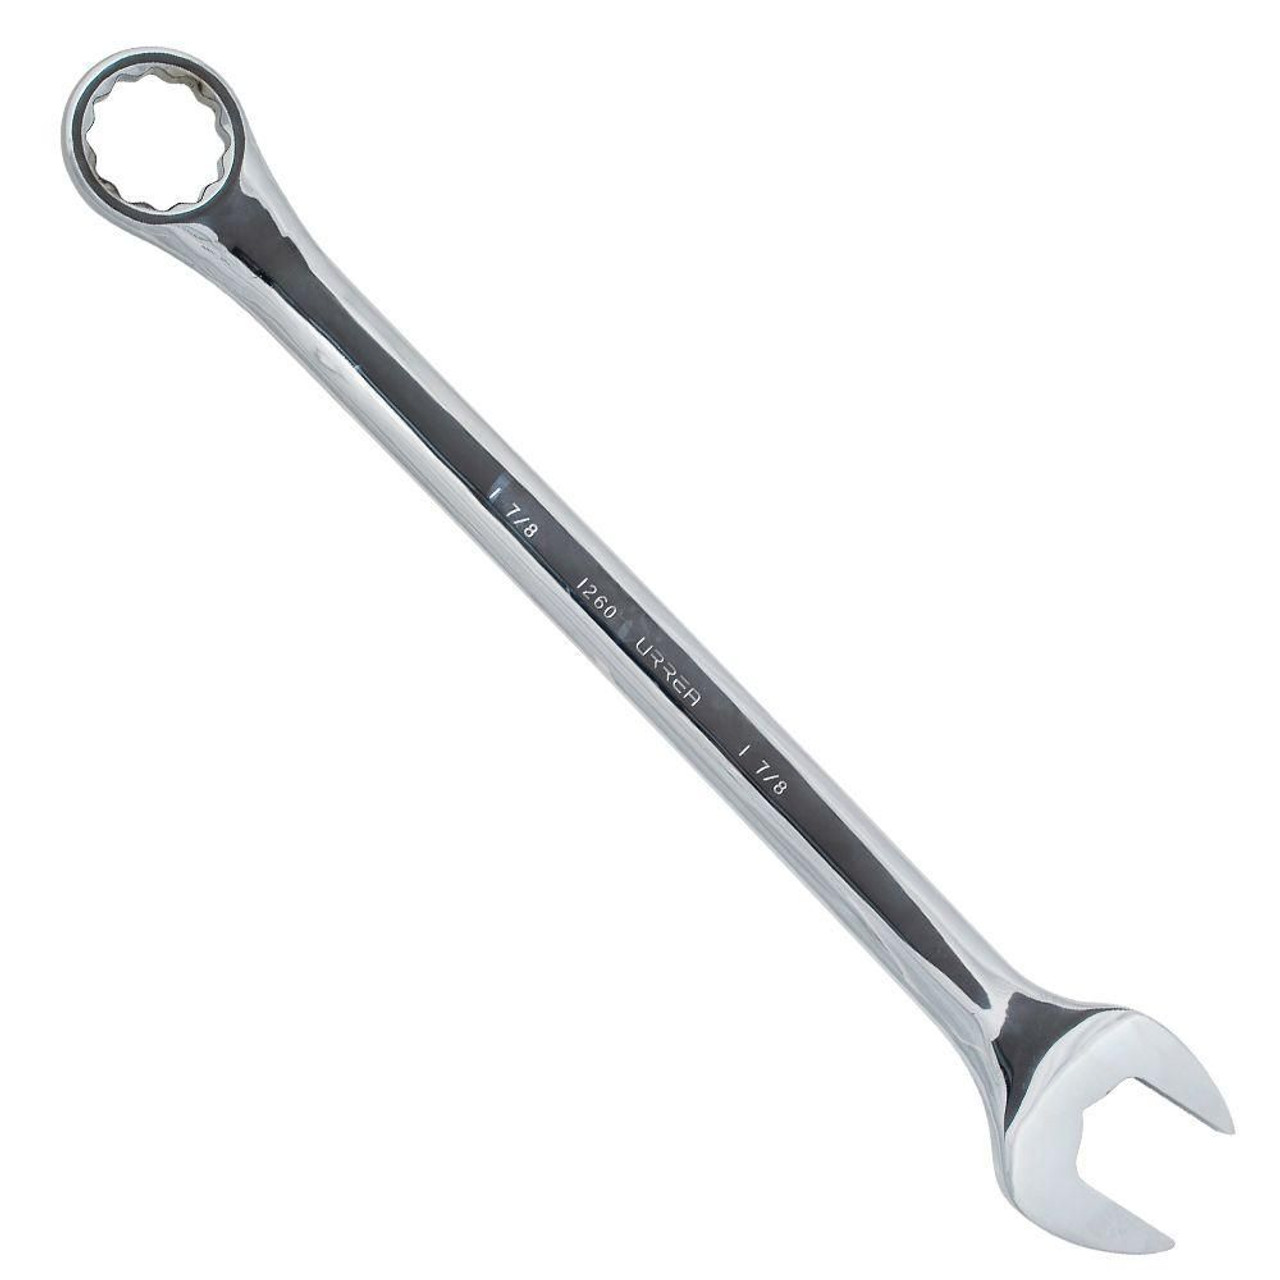 Full polished combination wrench, Size: 3/4, 12 point, Tool Length: 9-13/16"